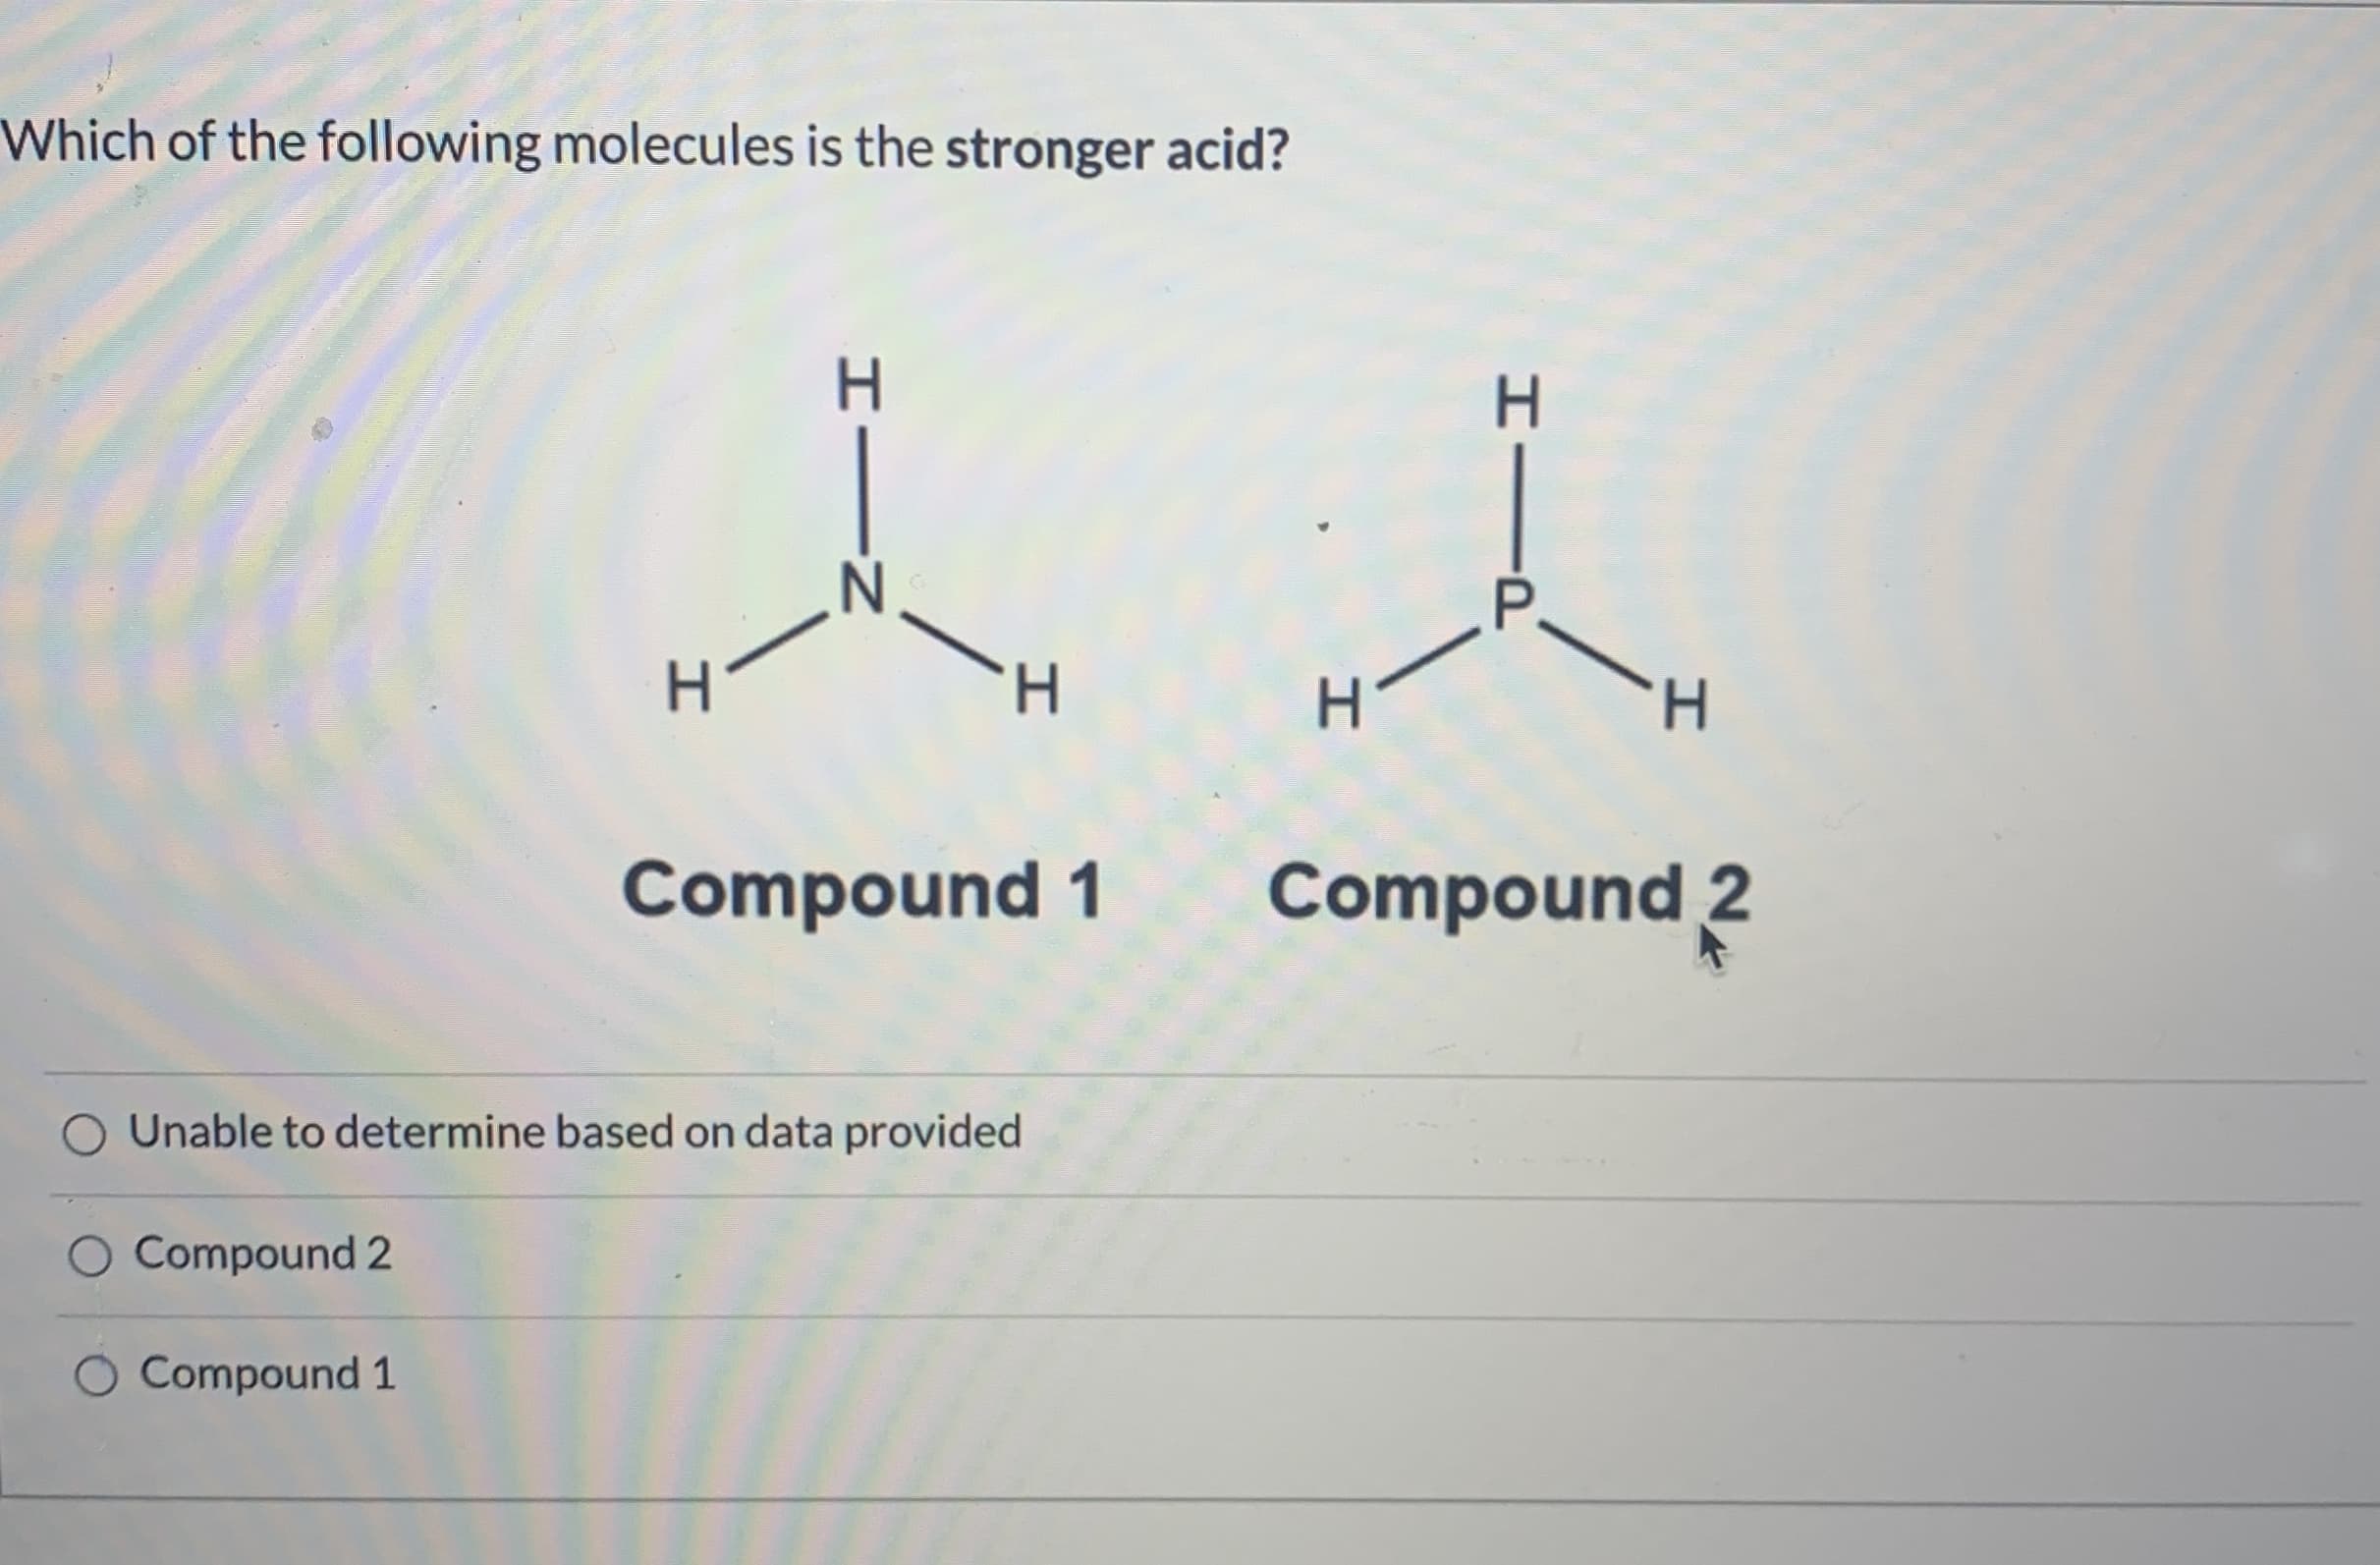 Which of the following molecules is the stronger acid?
P
H.
Compound 1
Compound 2
Unable to determine based on data provided
O Compound 2
Compound 1
